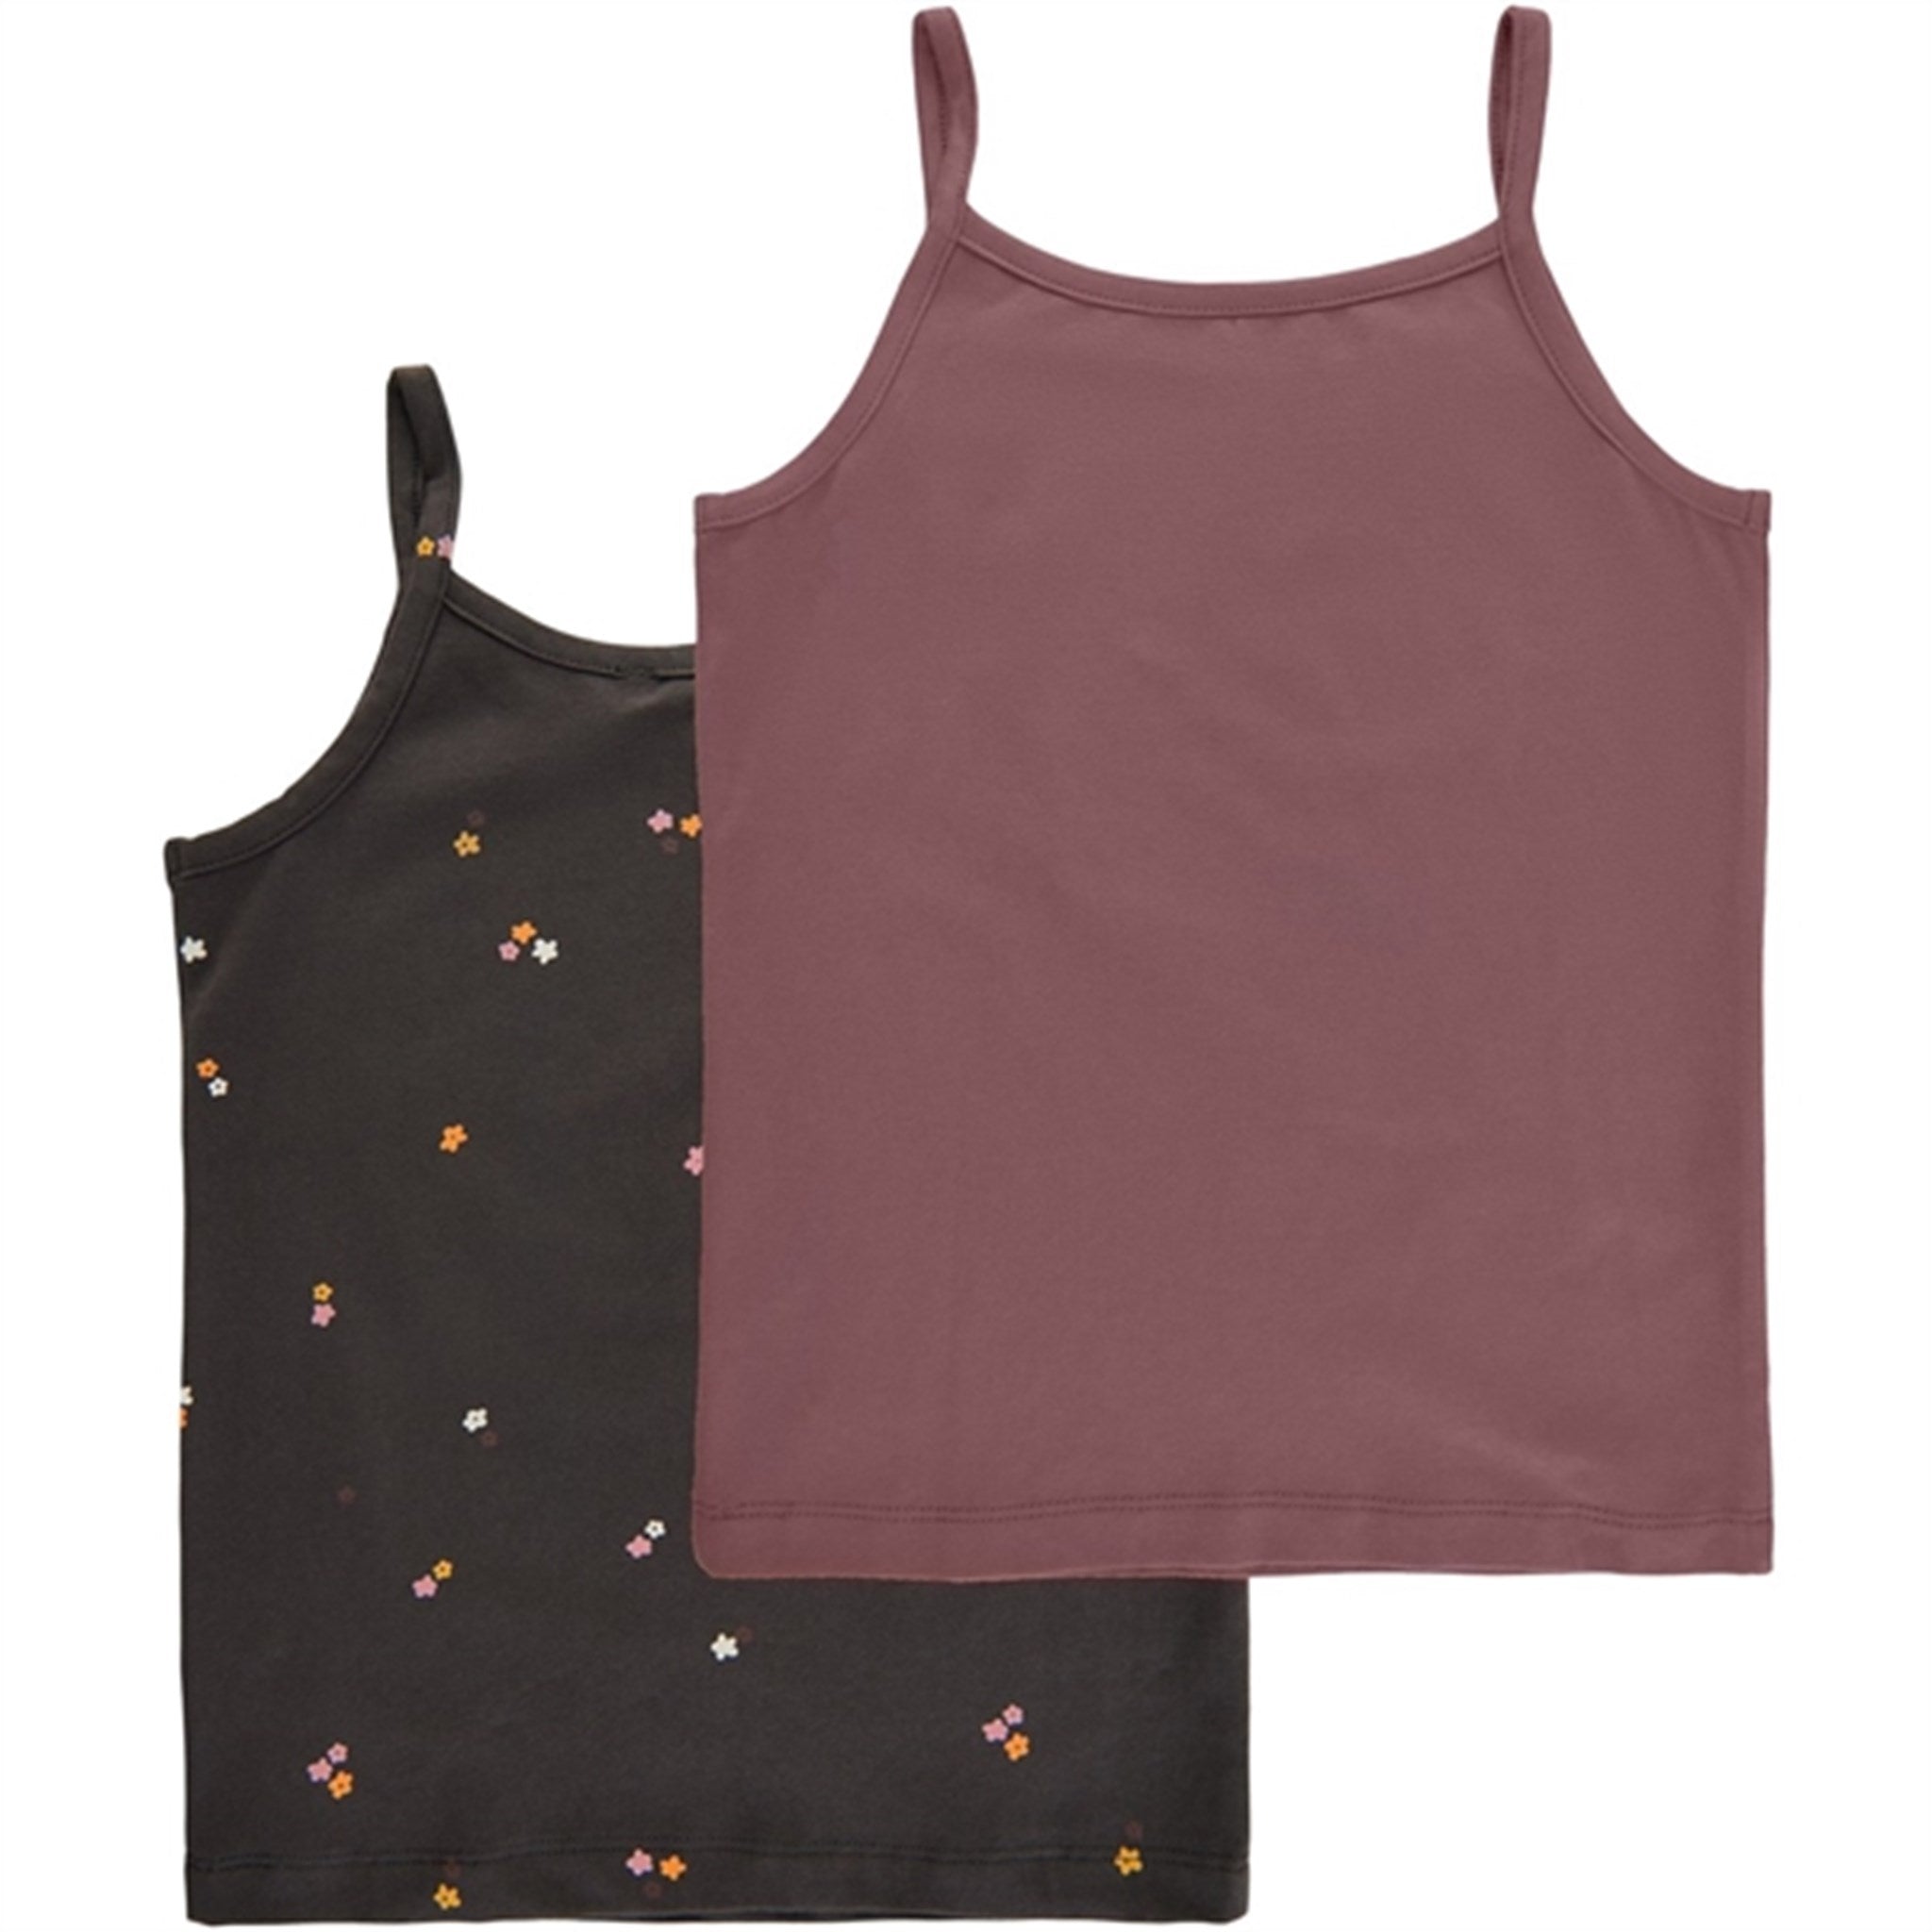 The New Rose Brown Strap Top 2-pack 2